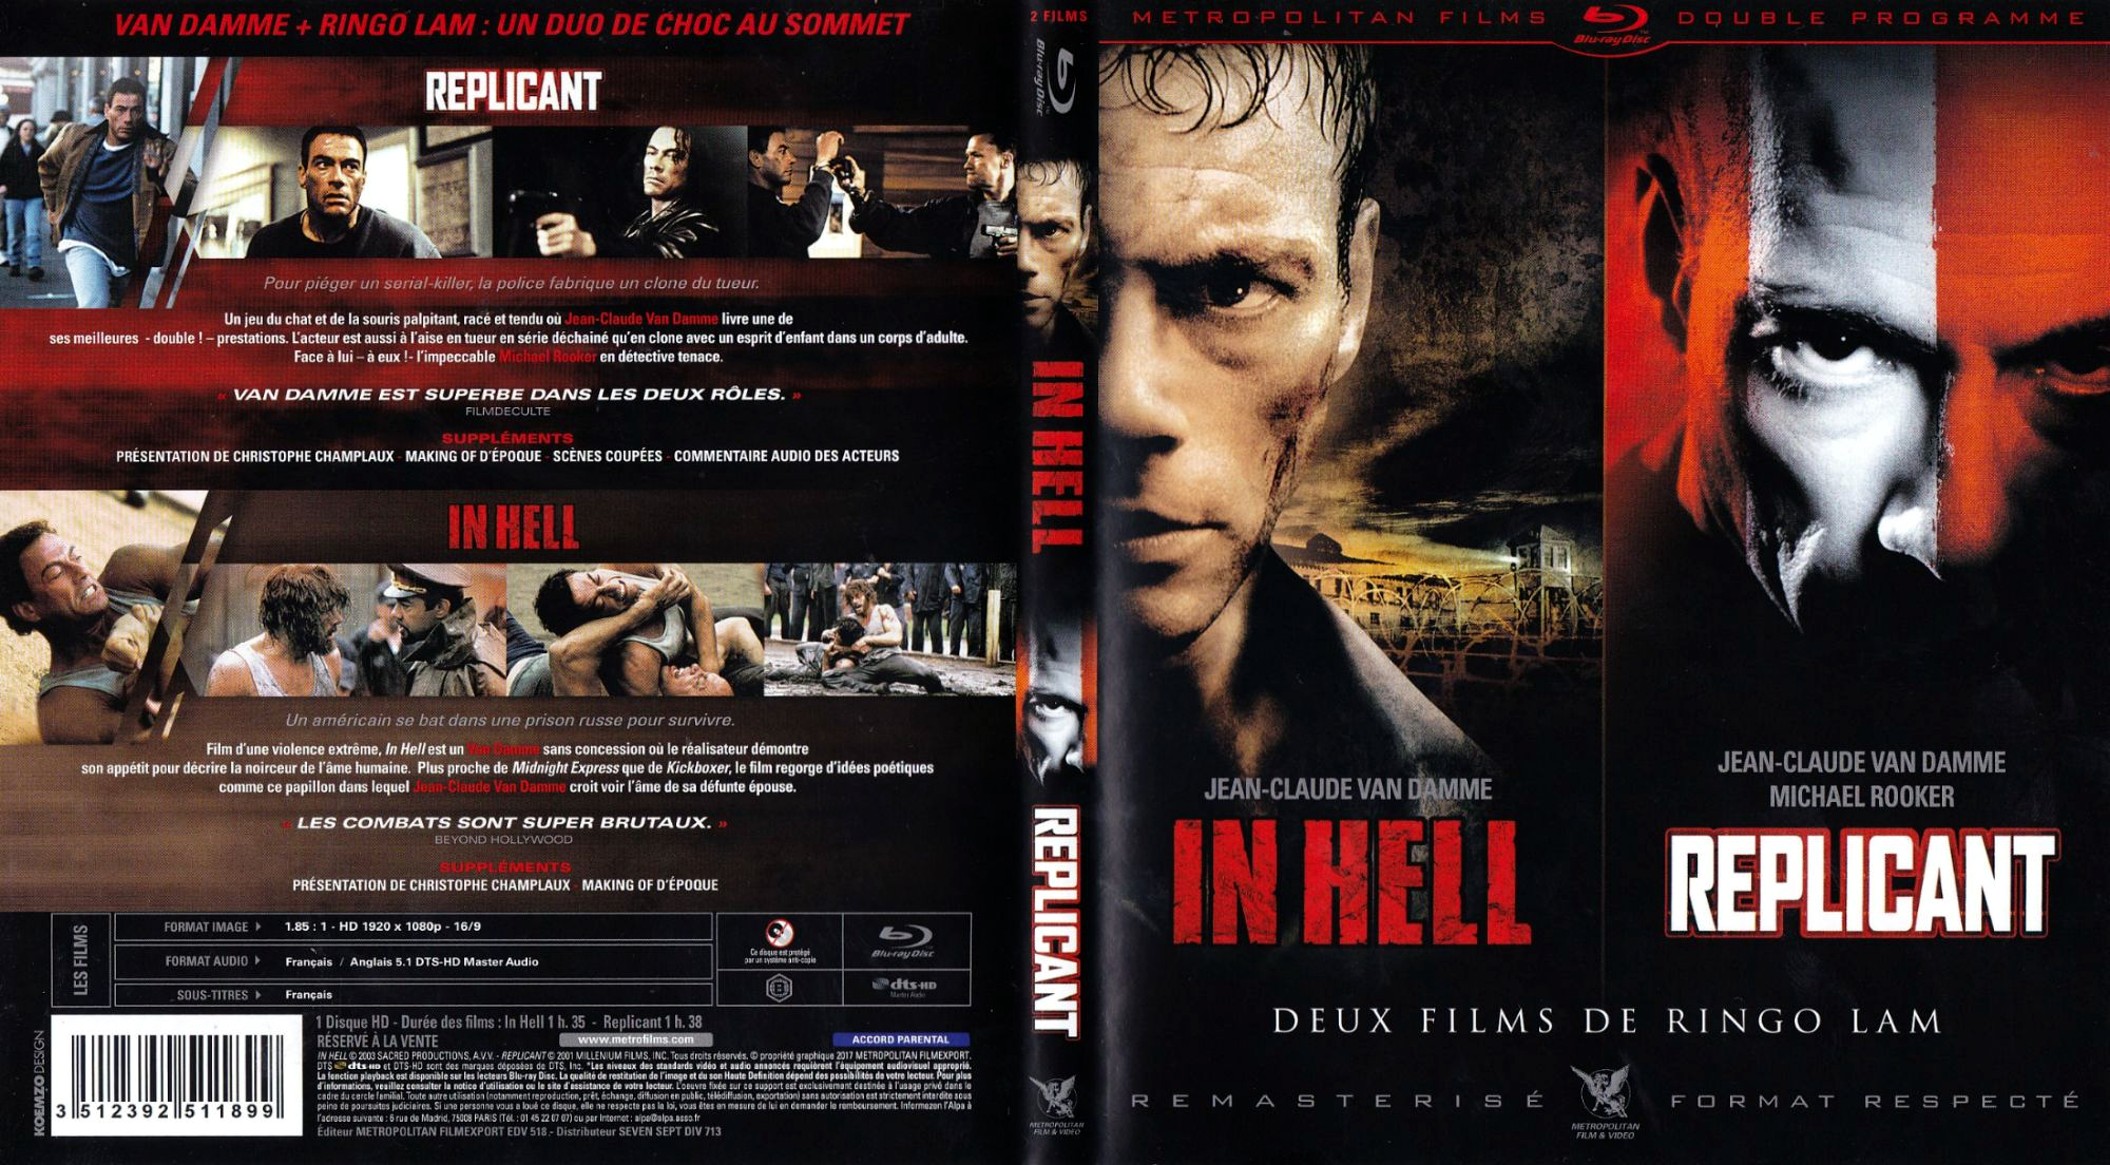 Jaquette DVD In Hell - Replicant (BLU-RAY)